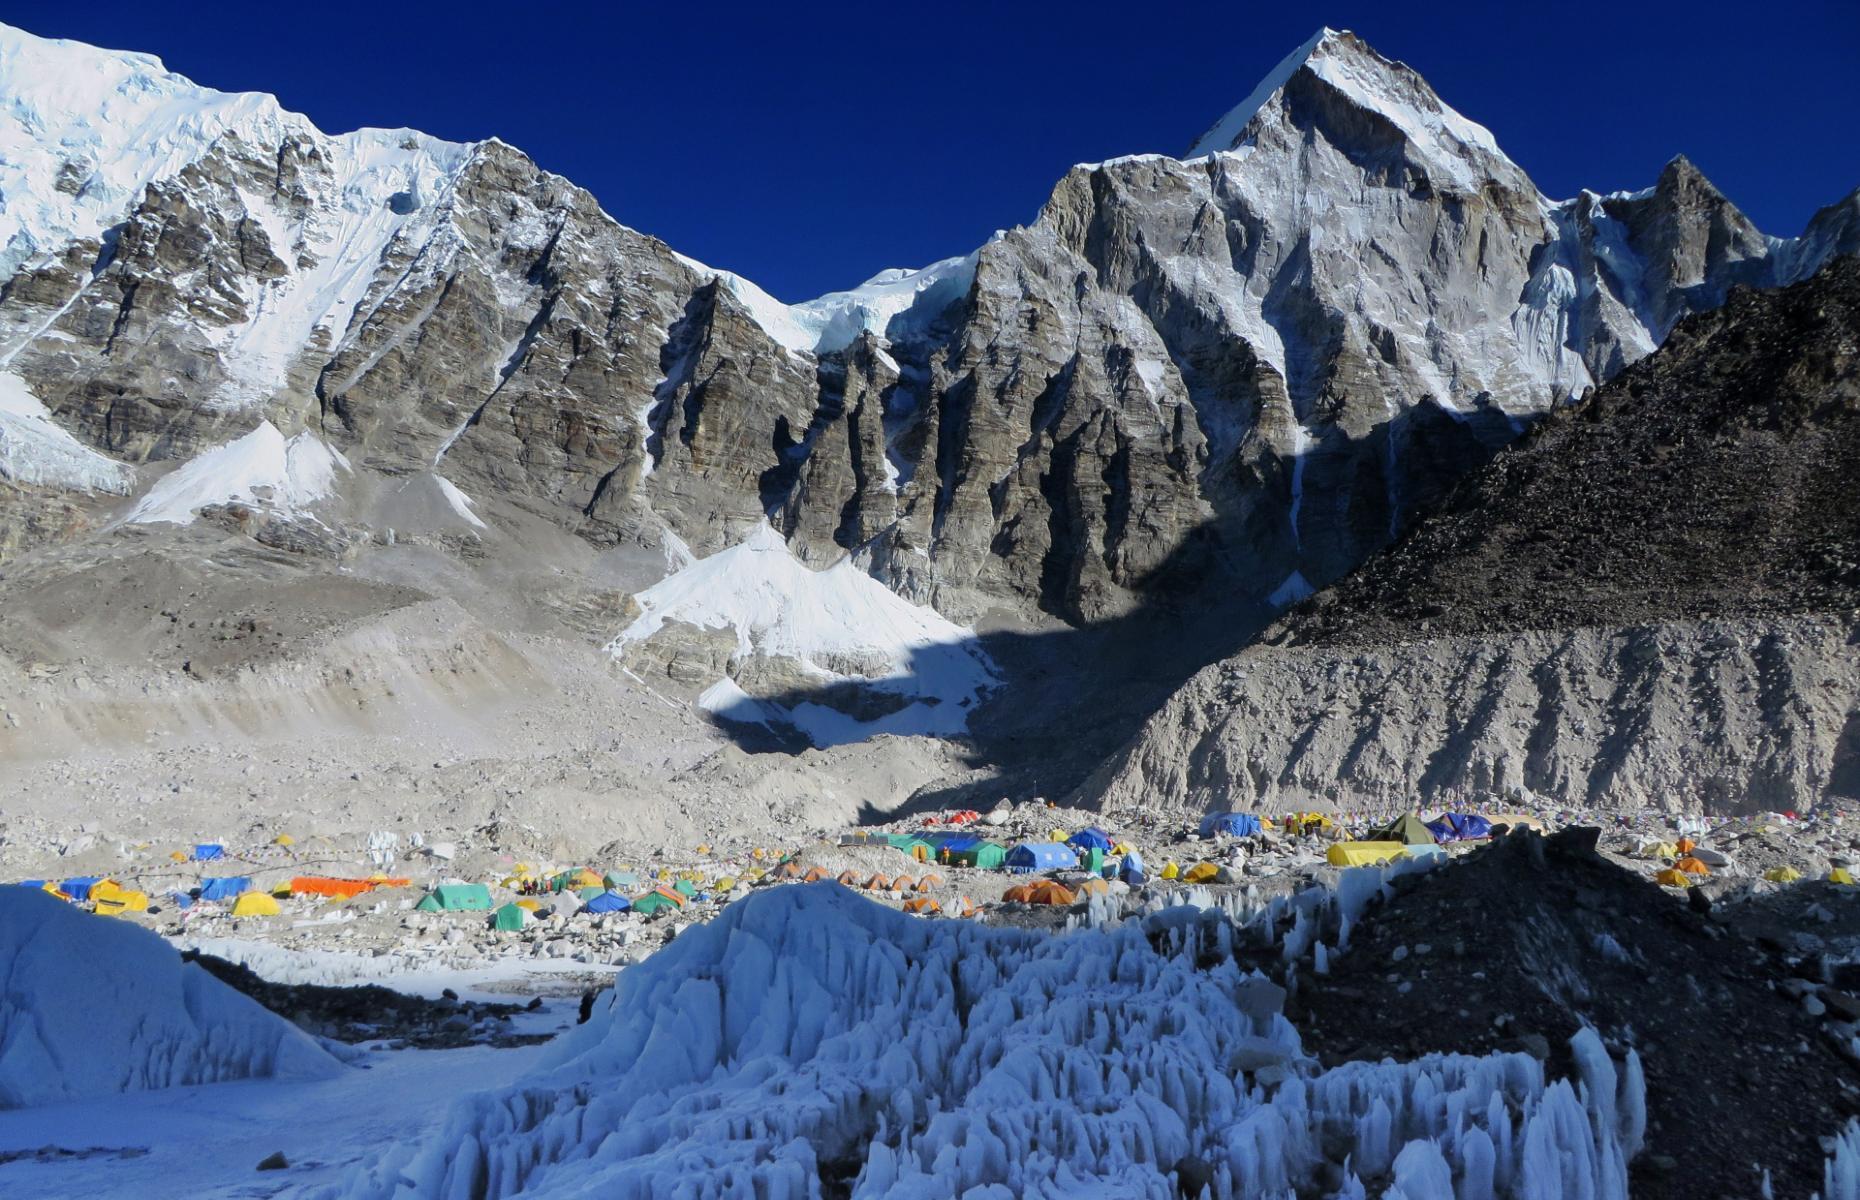 <p>The most treacherous part of the route up Everest is the Khumbu icefall, a steep stretch of the mountain at the head of the Khumbu glacier where avalanches are common. The route is usually secured with ropes and ladders by Sherpas each year. But in April 2014, tragedy struck when 16 Sherpas were killed while preparing the icefall for climbers, after a 7.9 magnitude earthquake led to a deadly avalanche. The event prompted calls for greater rights for Sherpas, who represent one-third of deaths on Everest.</p>